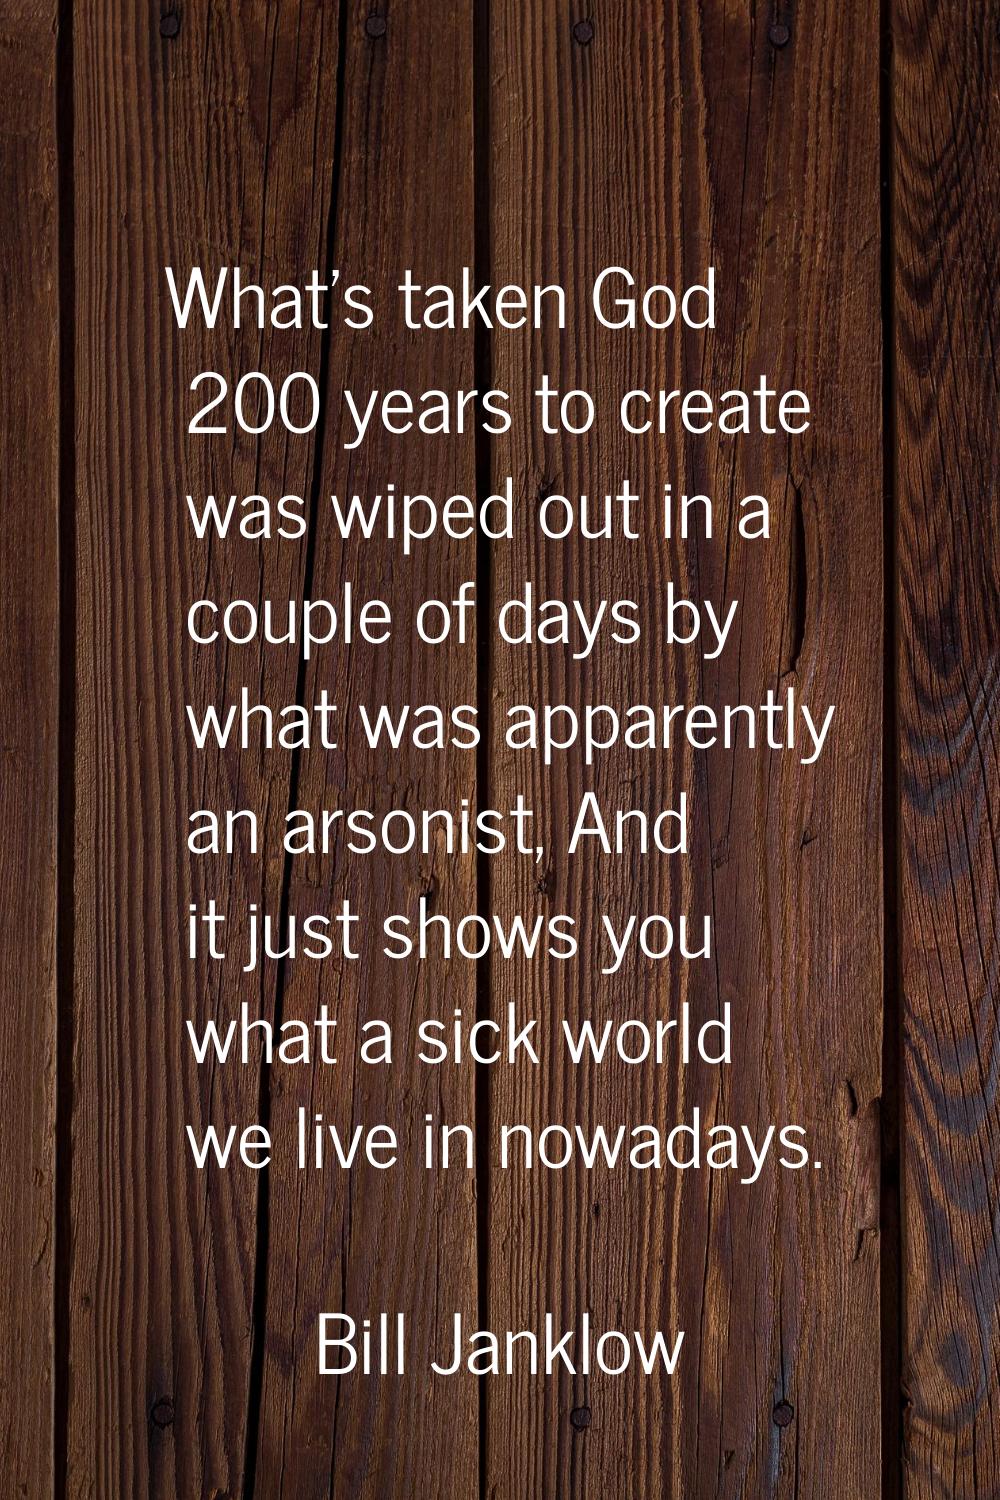 What's taken God 200 years to create was wiped out in a couple of days by what was apparently an ar